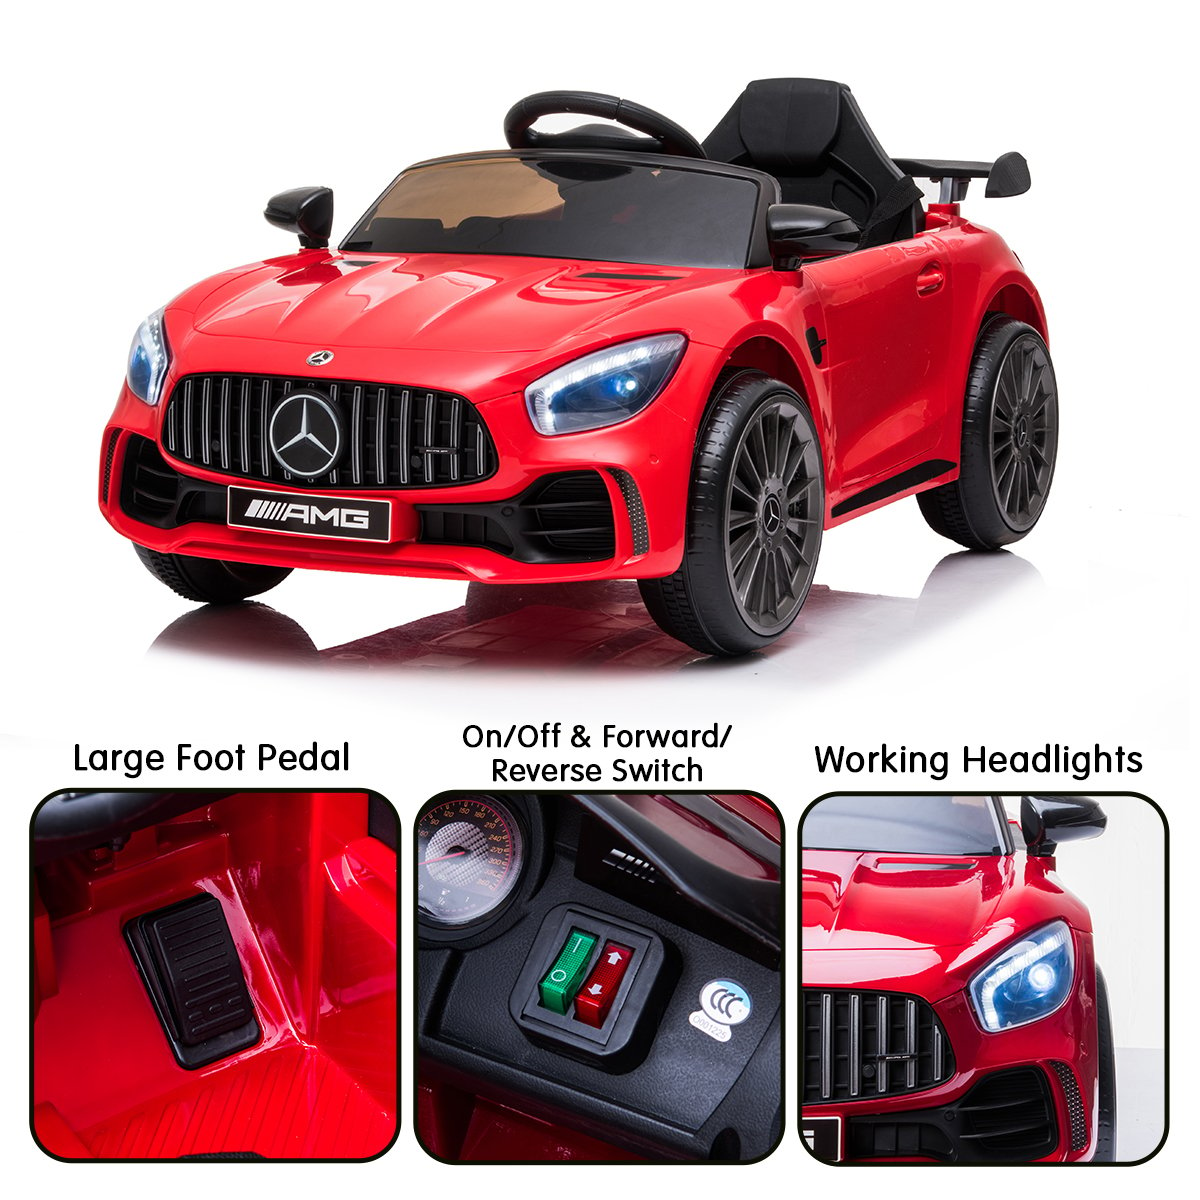 Kahuna Mercedes Benz Licensed Kids Electric Ride On Car Remote Control - Red